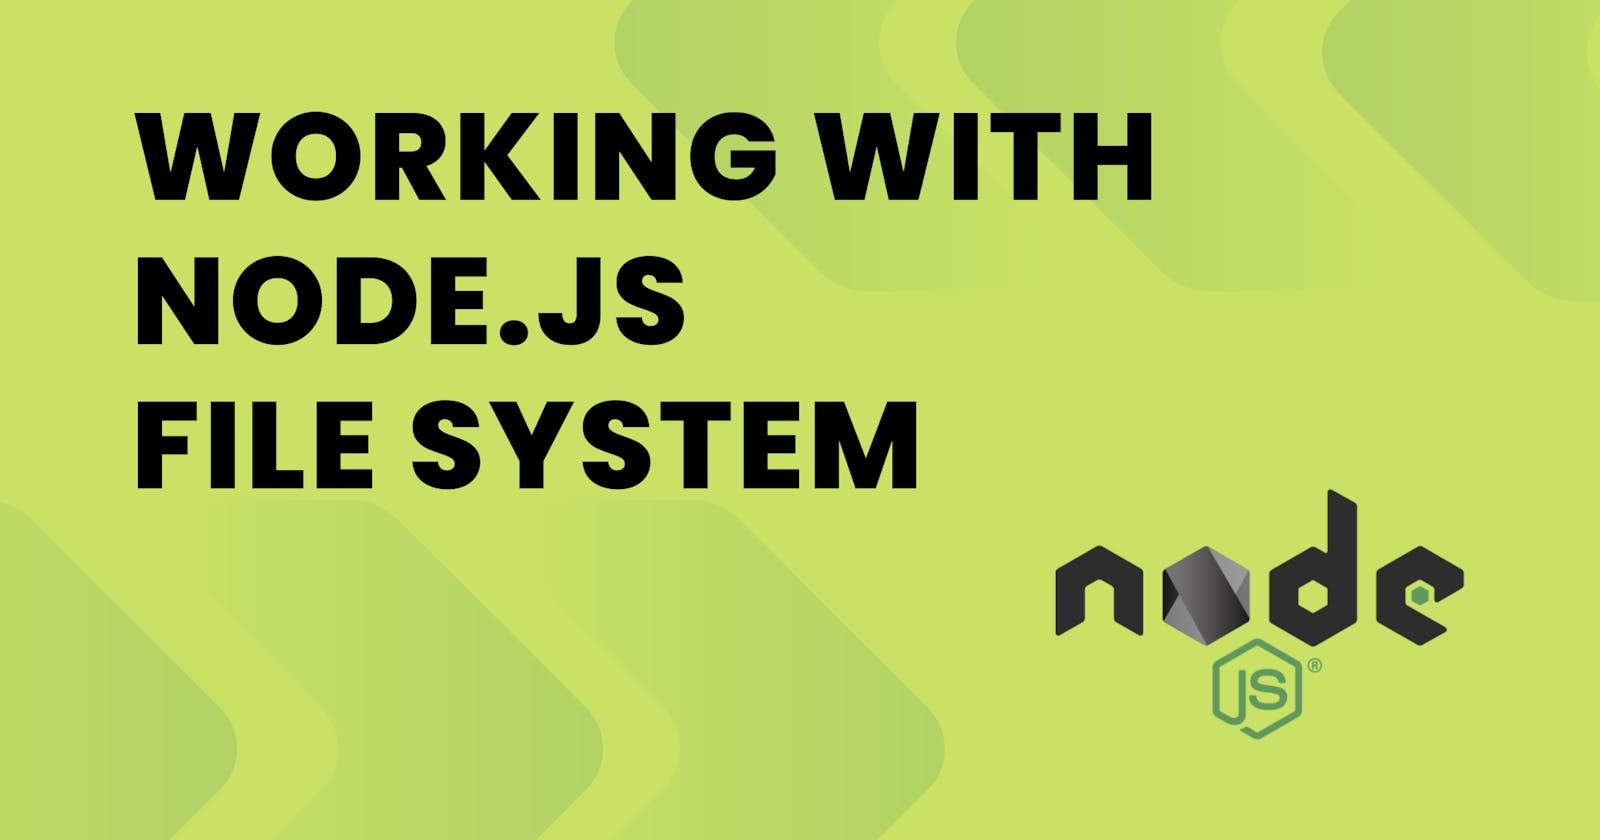 Working with the Node.js File System